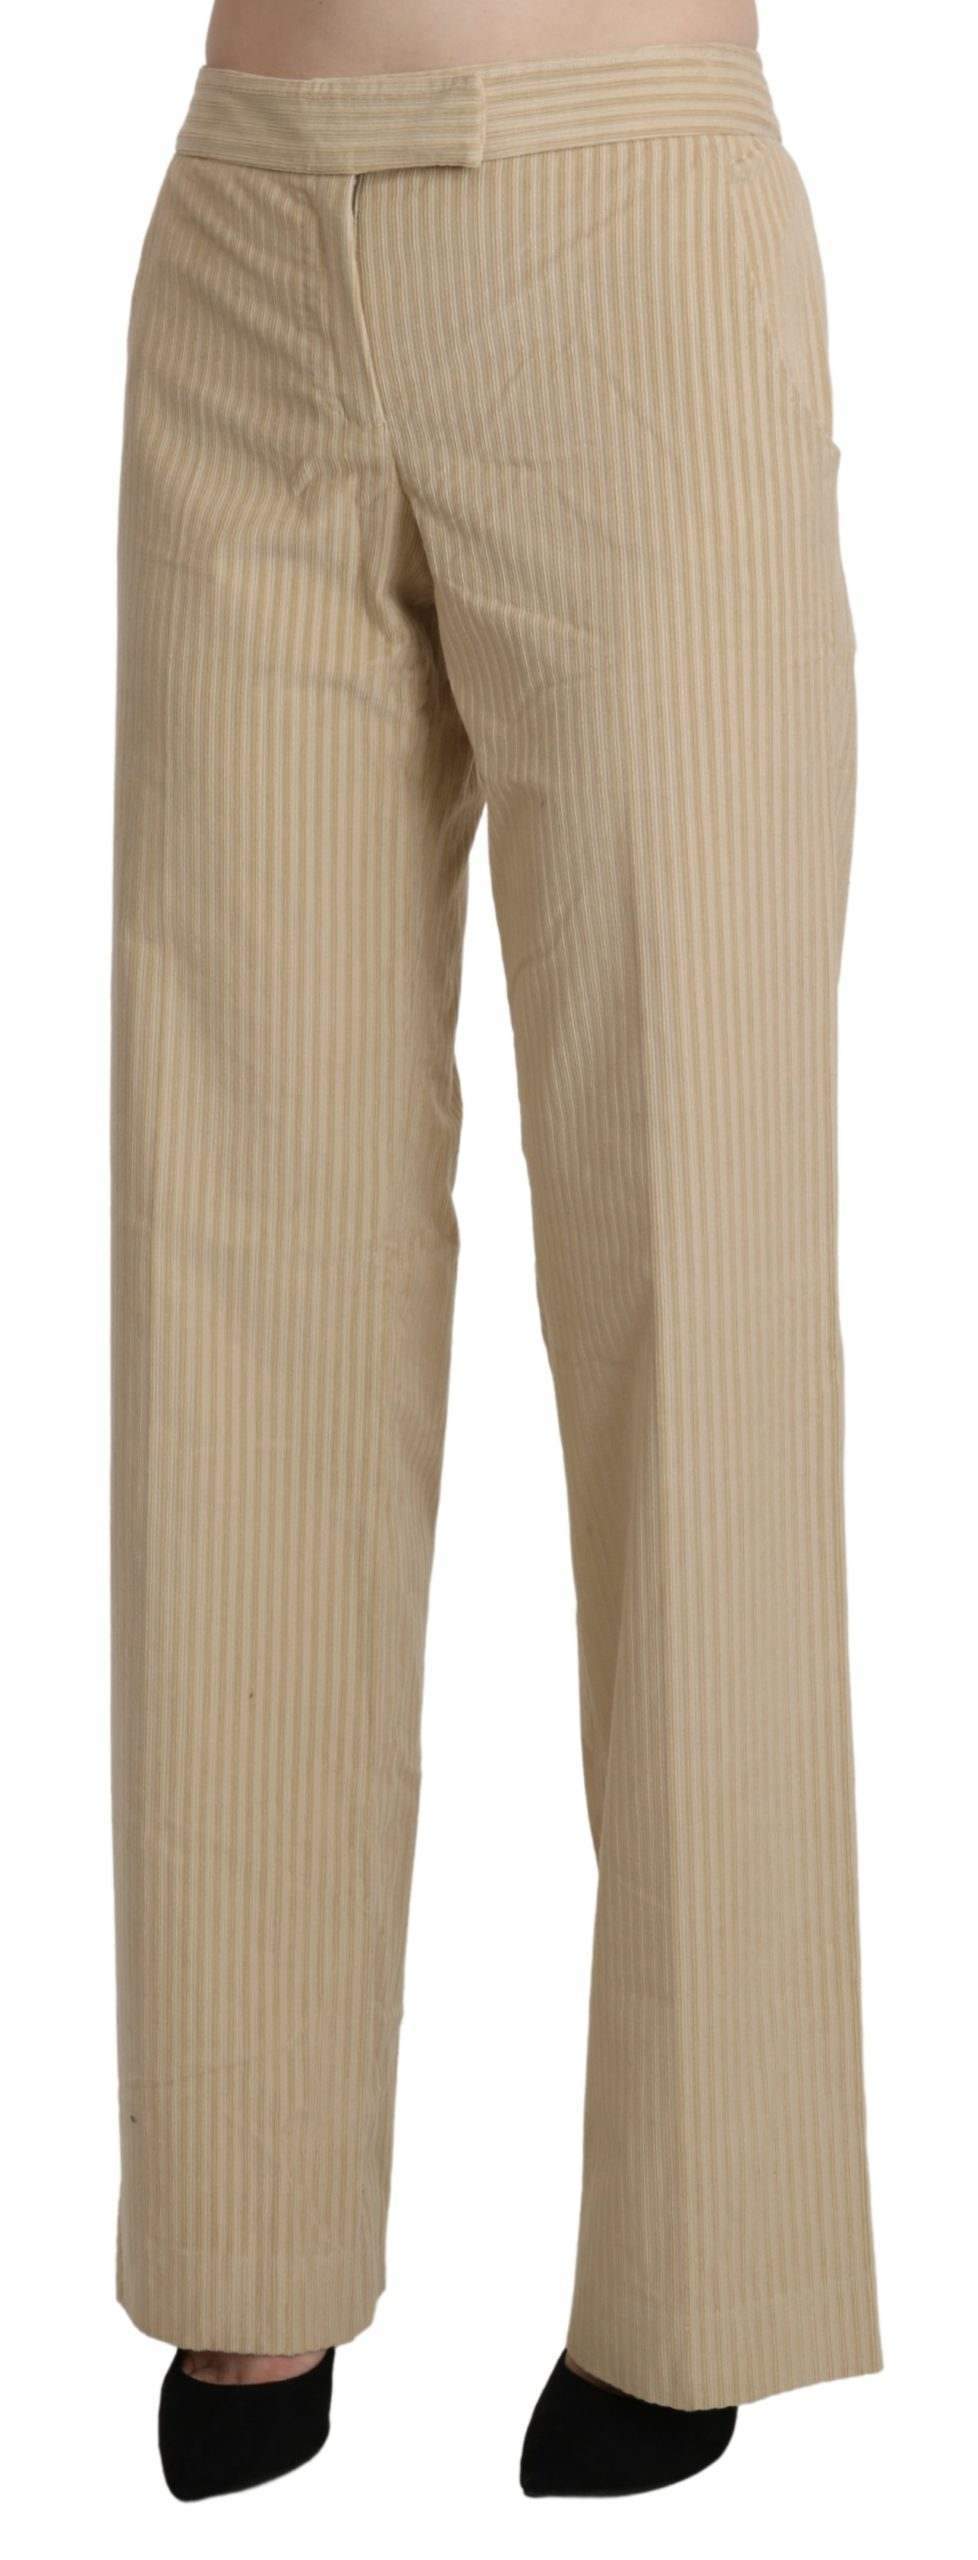 Ermanno Scervino Beige High Waist Flared Wide Leg Trouser Pants #women, Beige, Ermanno Scervino, feed-agegroup-adult, feed-color-beige, feed-gender-female, feed-size-IT44|L, feed-size-IT46|XL, Gender_Women, IT44|L, IT46|XL, Jeans & Pants - Women - Clothing, Women - New Arrivals at SEYMAYKA